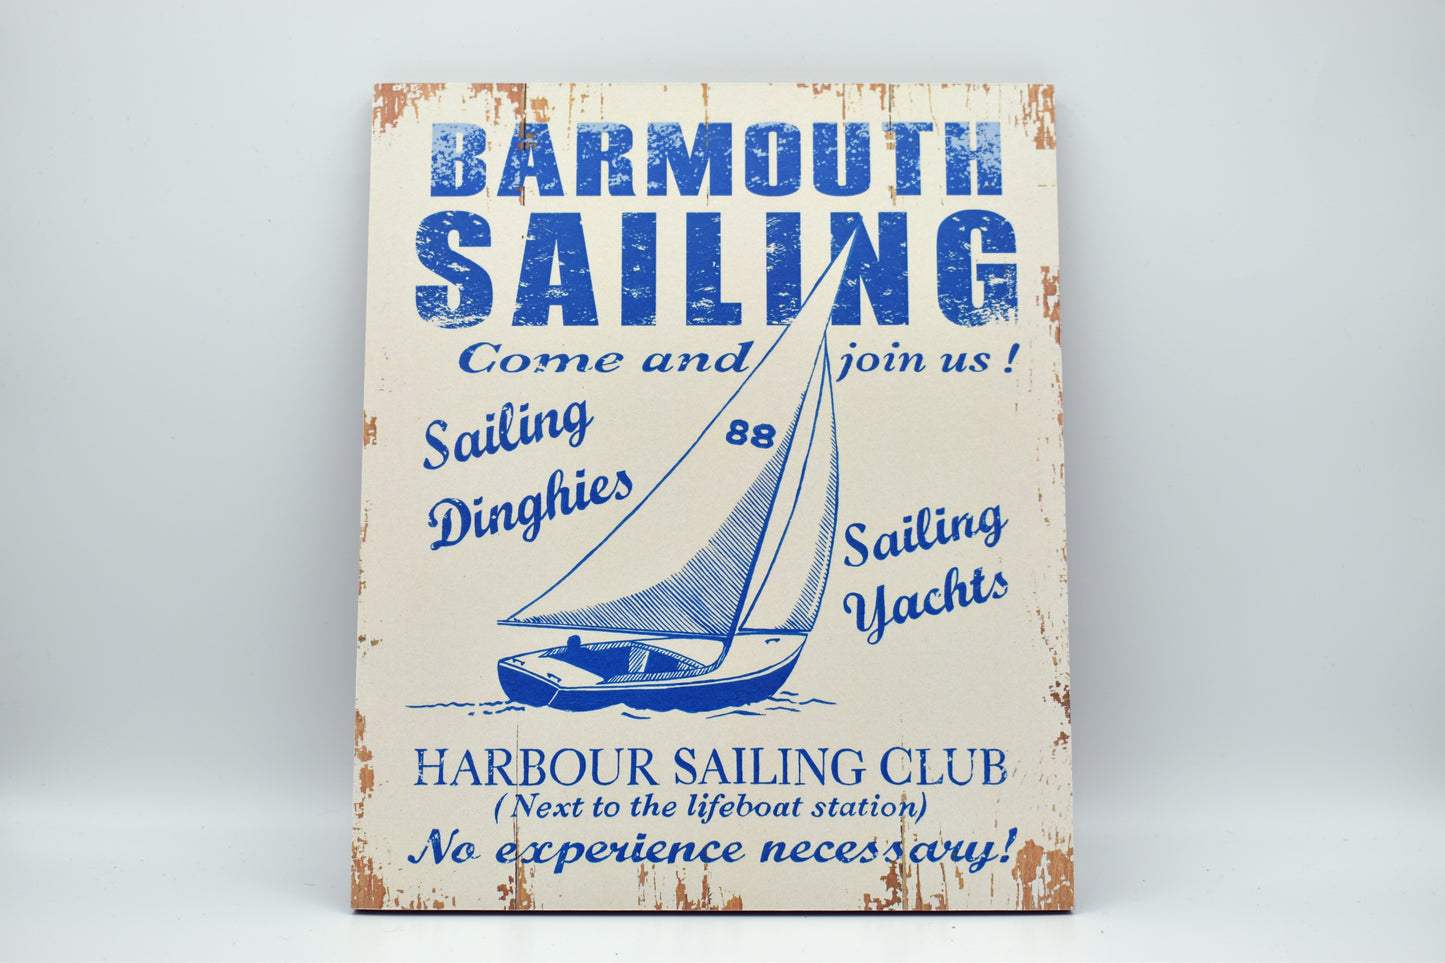 Barmouth Harbour Sailing Club Sign